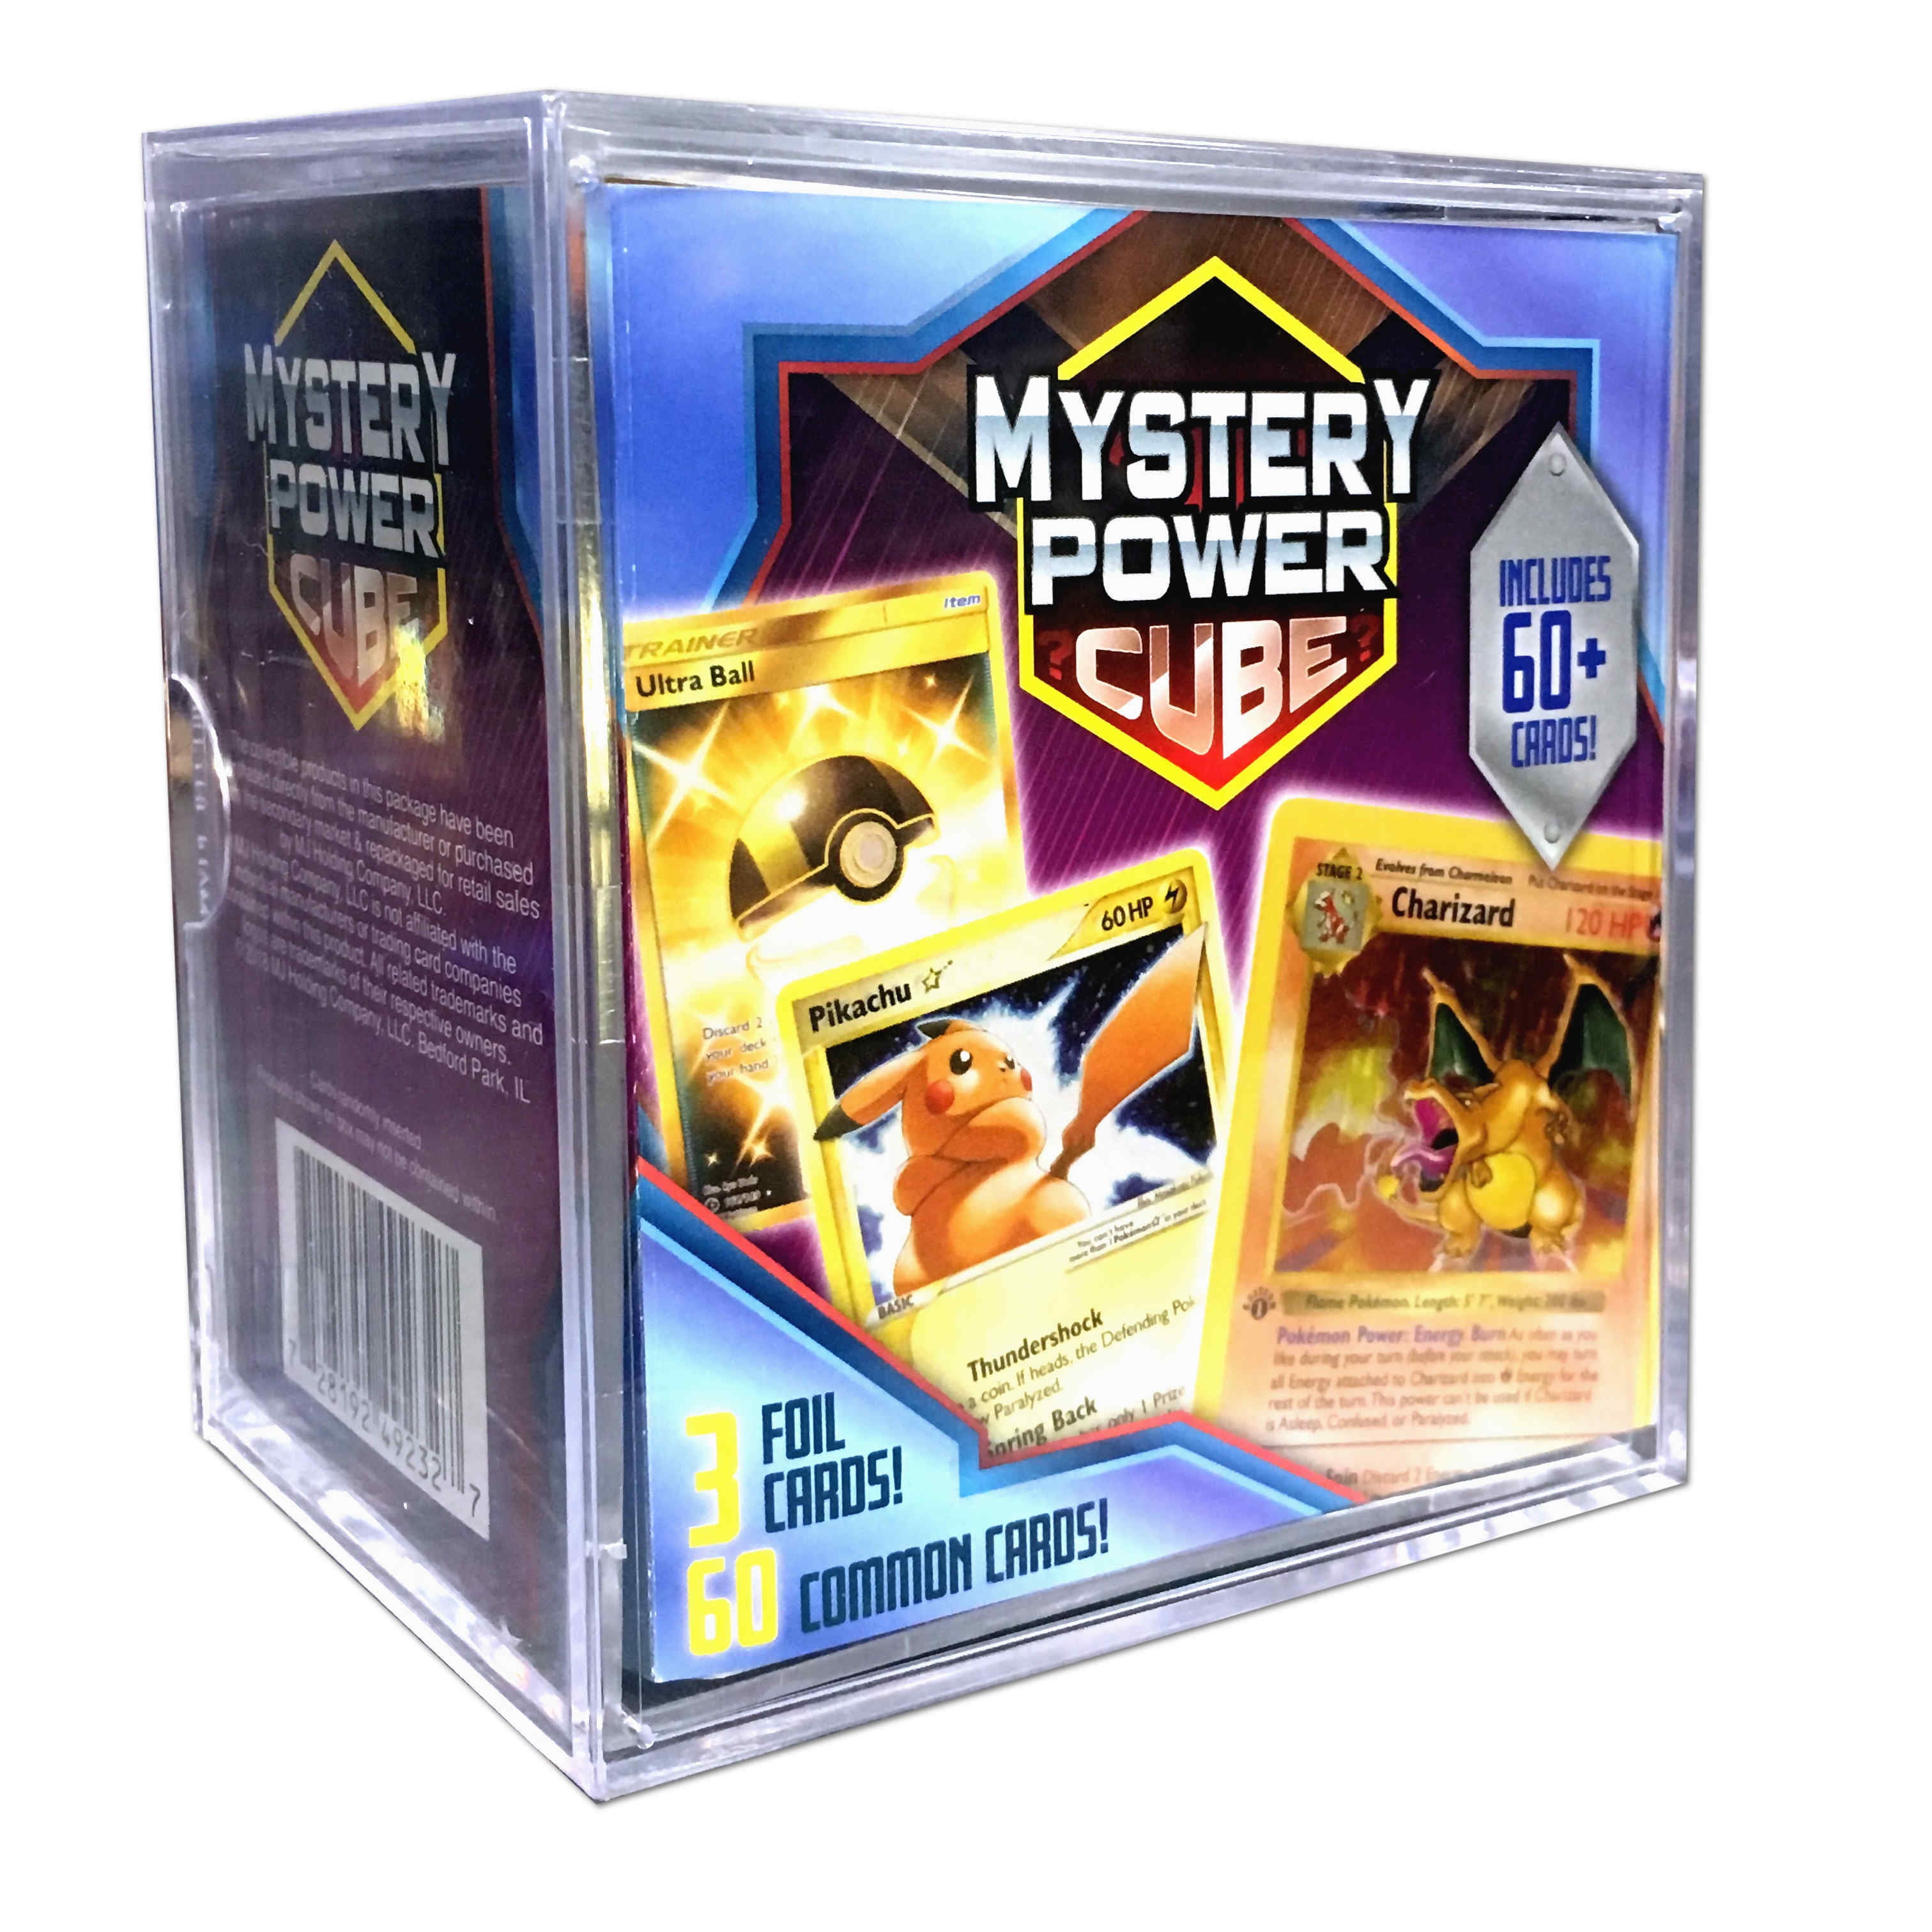 1 Pokemon Mystery Power Cube *Factory Sealed* Chance At Charizard!!Fast Shipping